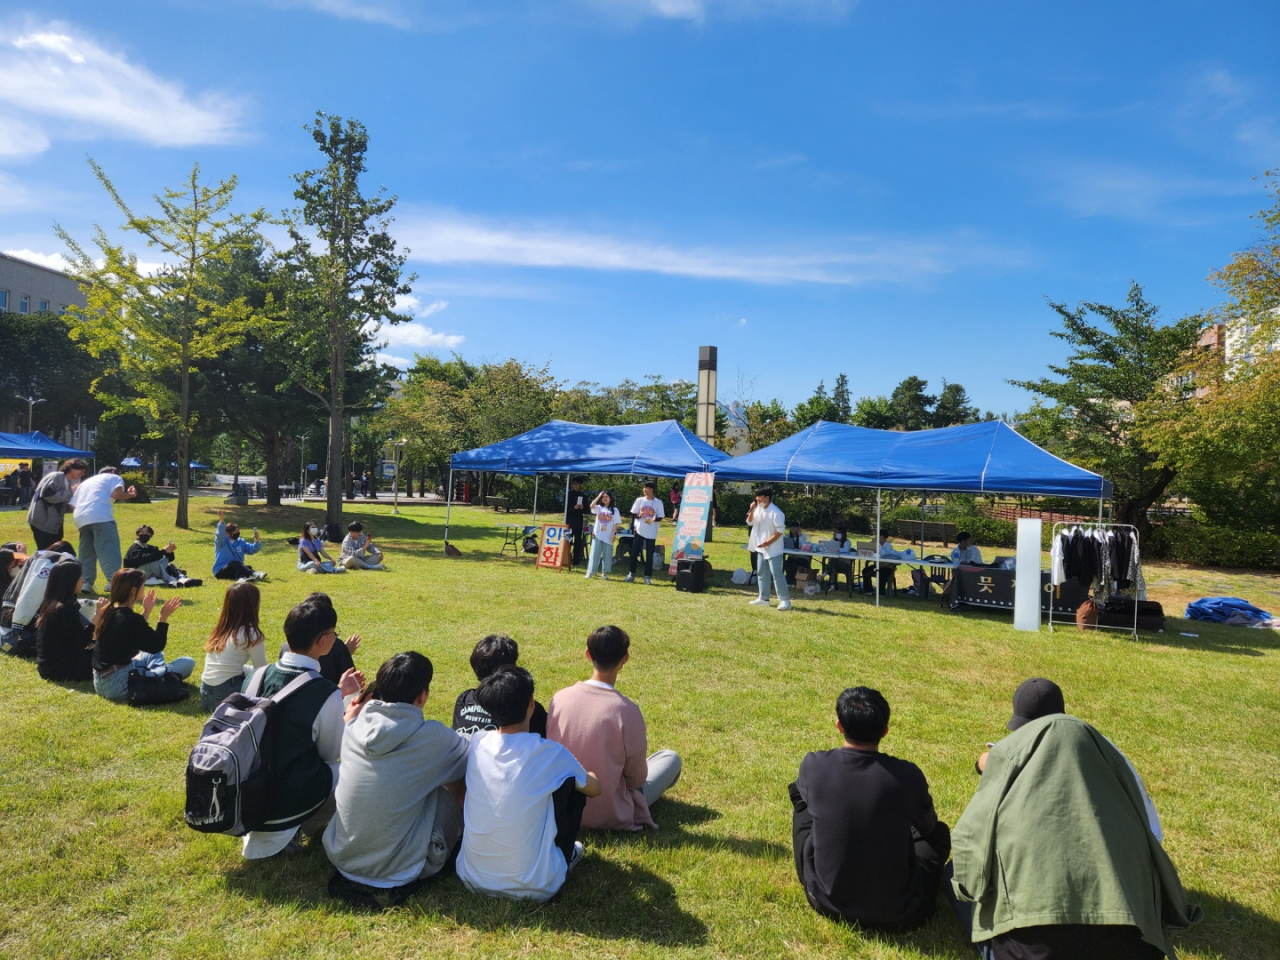 A student sings in front of peers and passers-by at Seoul National University of Science and Technology’s fall festival, held on Sept. 23. (Choi Jae-hee / The Korea Herald)